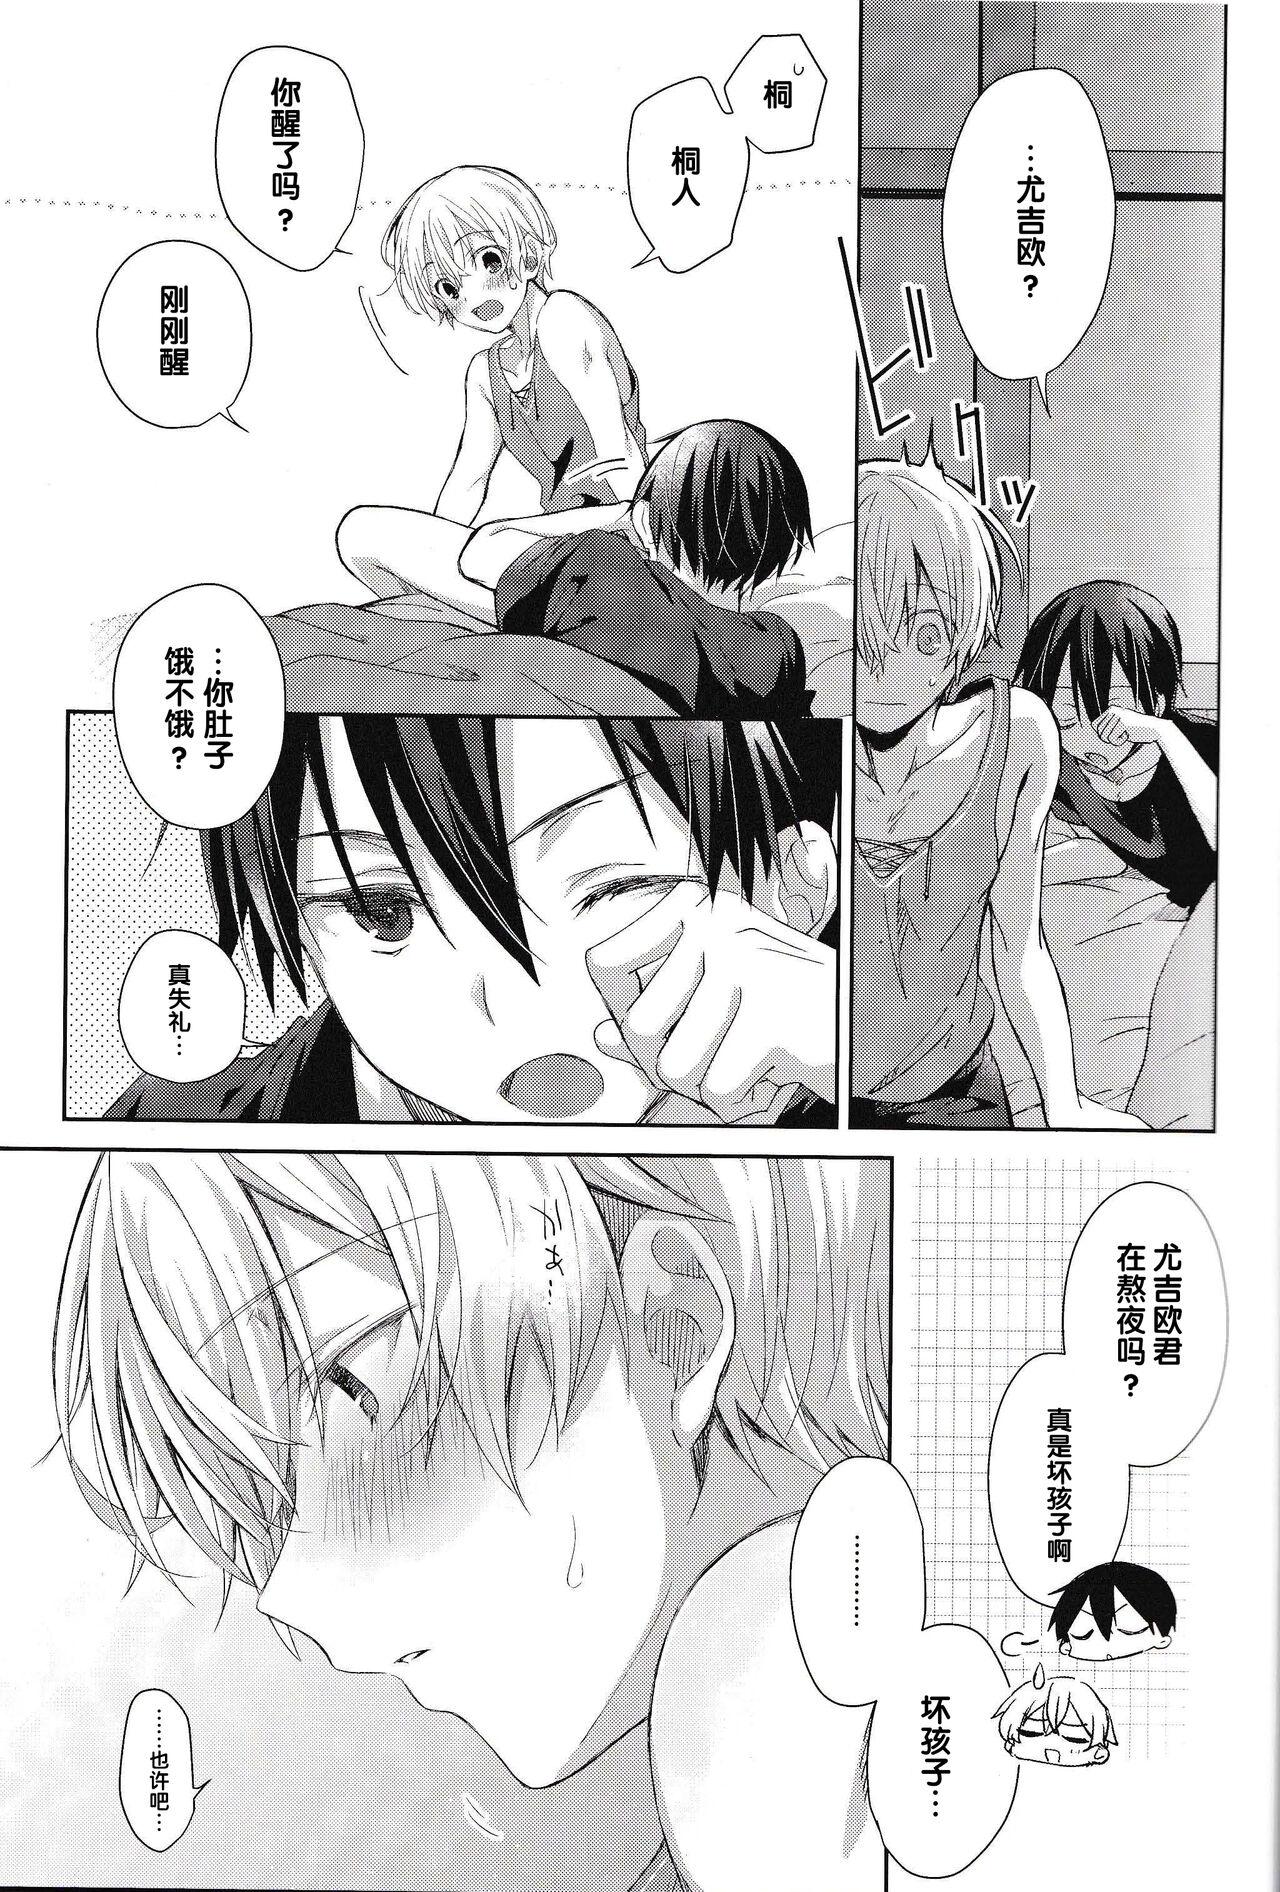 Amazing Oyasumi After Motion - Sword art online Fudendo - Page 4